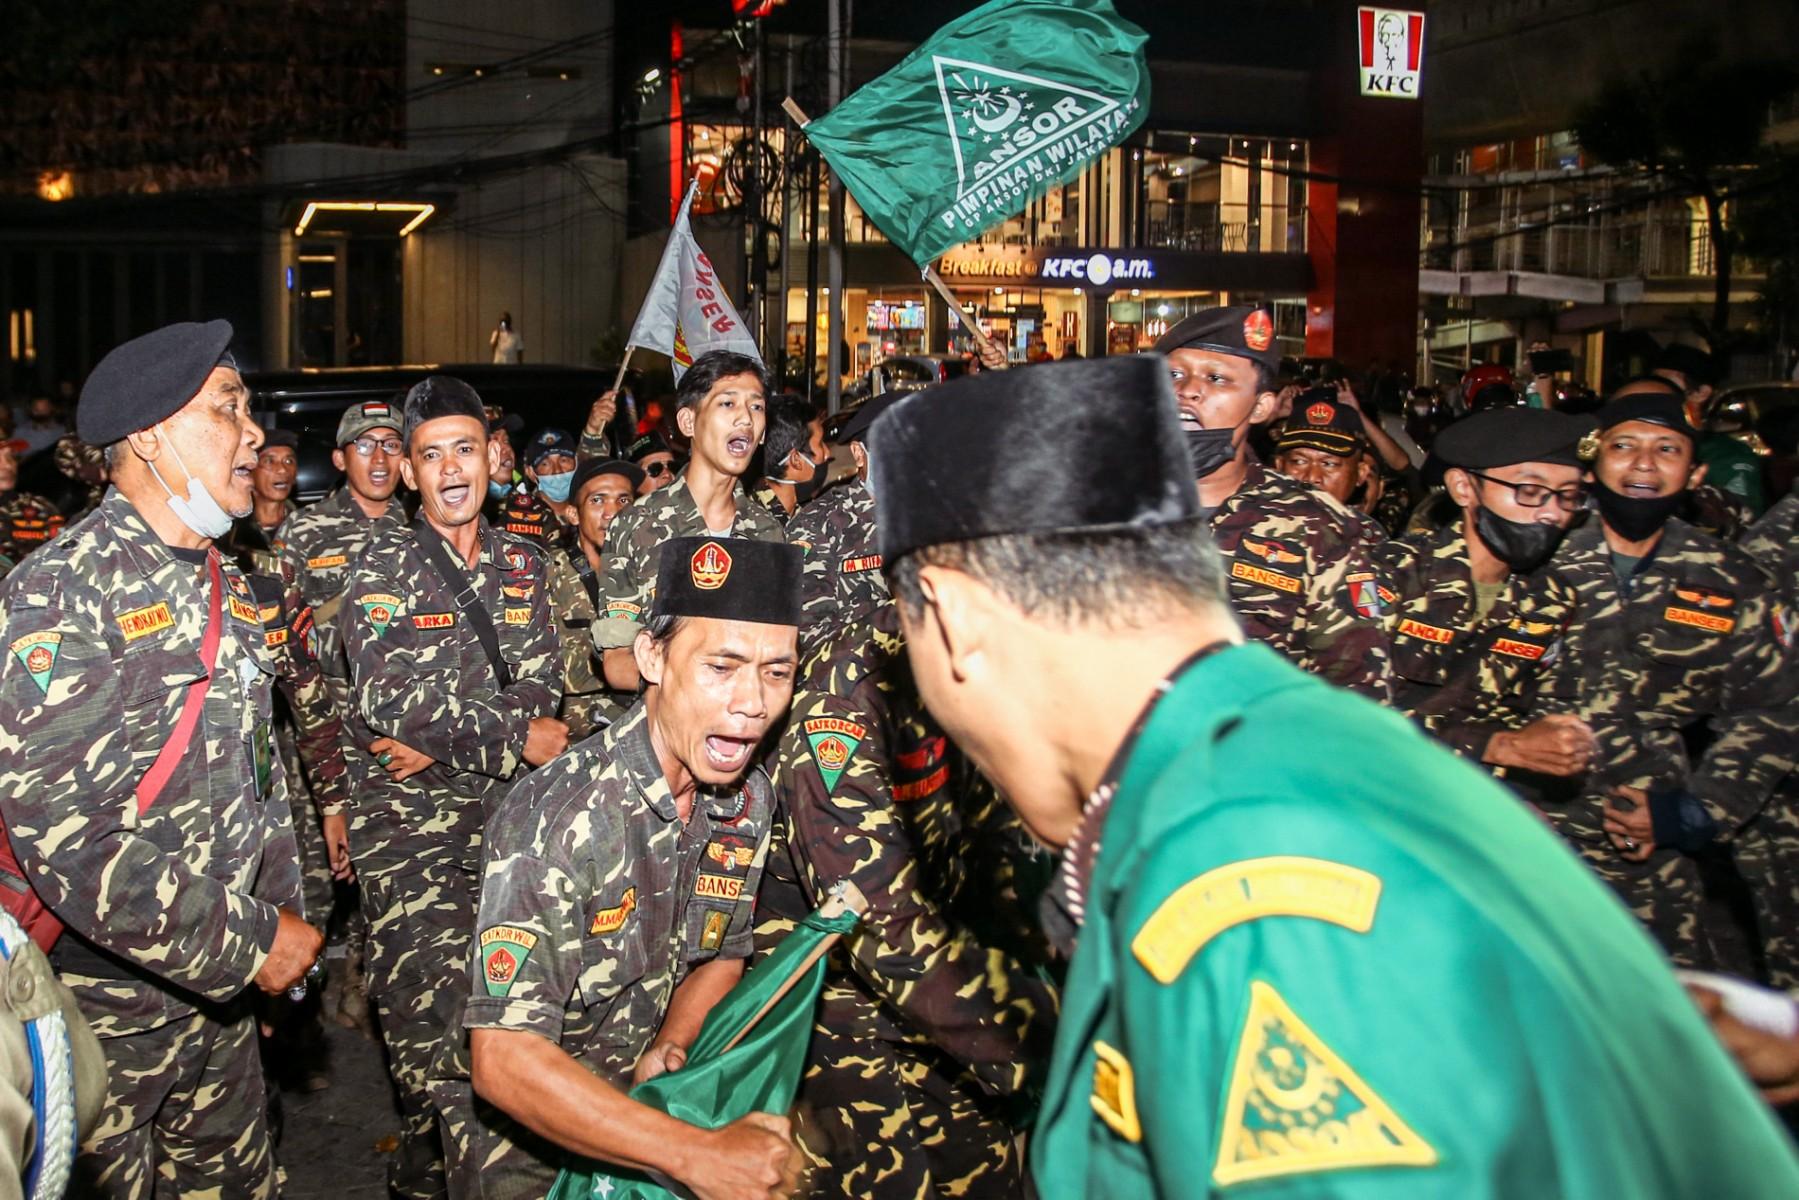 This picture taken on June 24 shows members of an Islamic organisation holding a protest in front of the Holywings bar in Jakarta. Indonesian police arrested six people on charges of blasphemy over the bar chain's free alcohol promotion for patrons named Mohammed. Photo: AFP